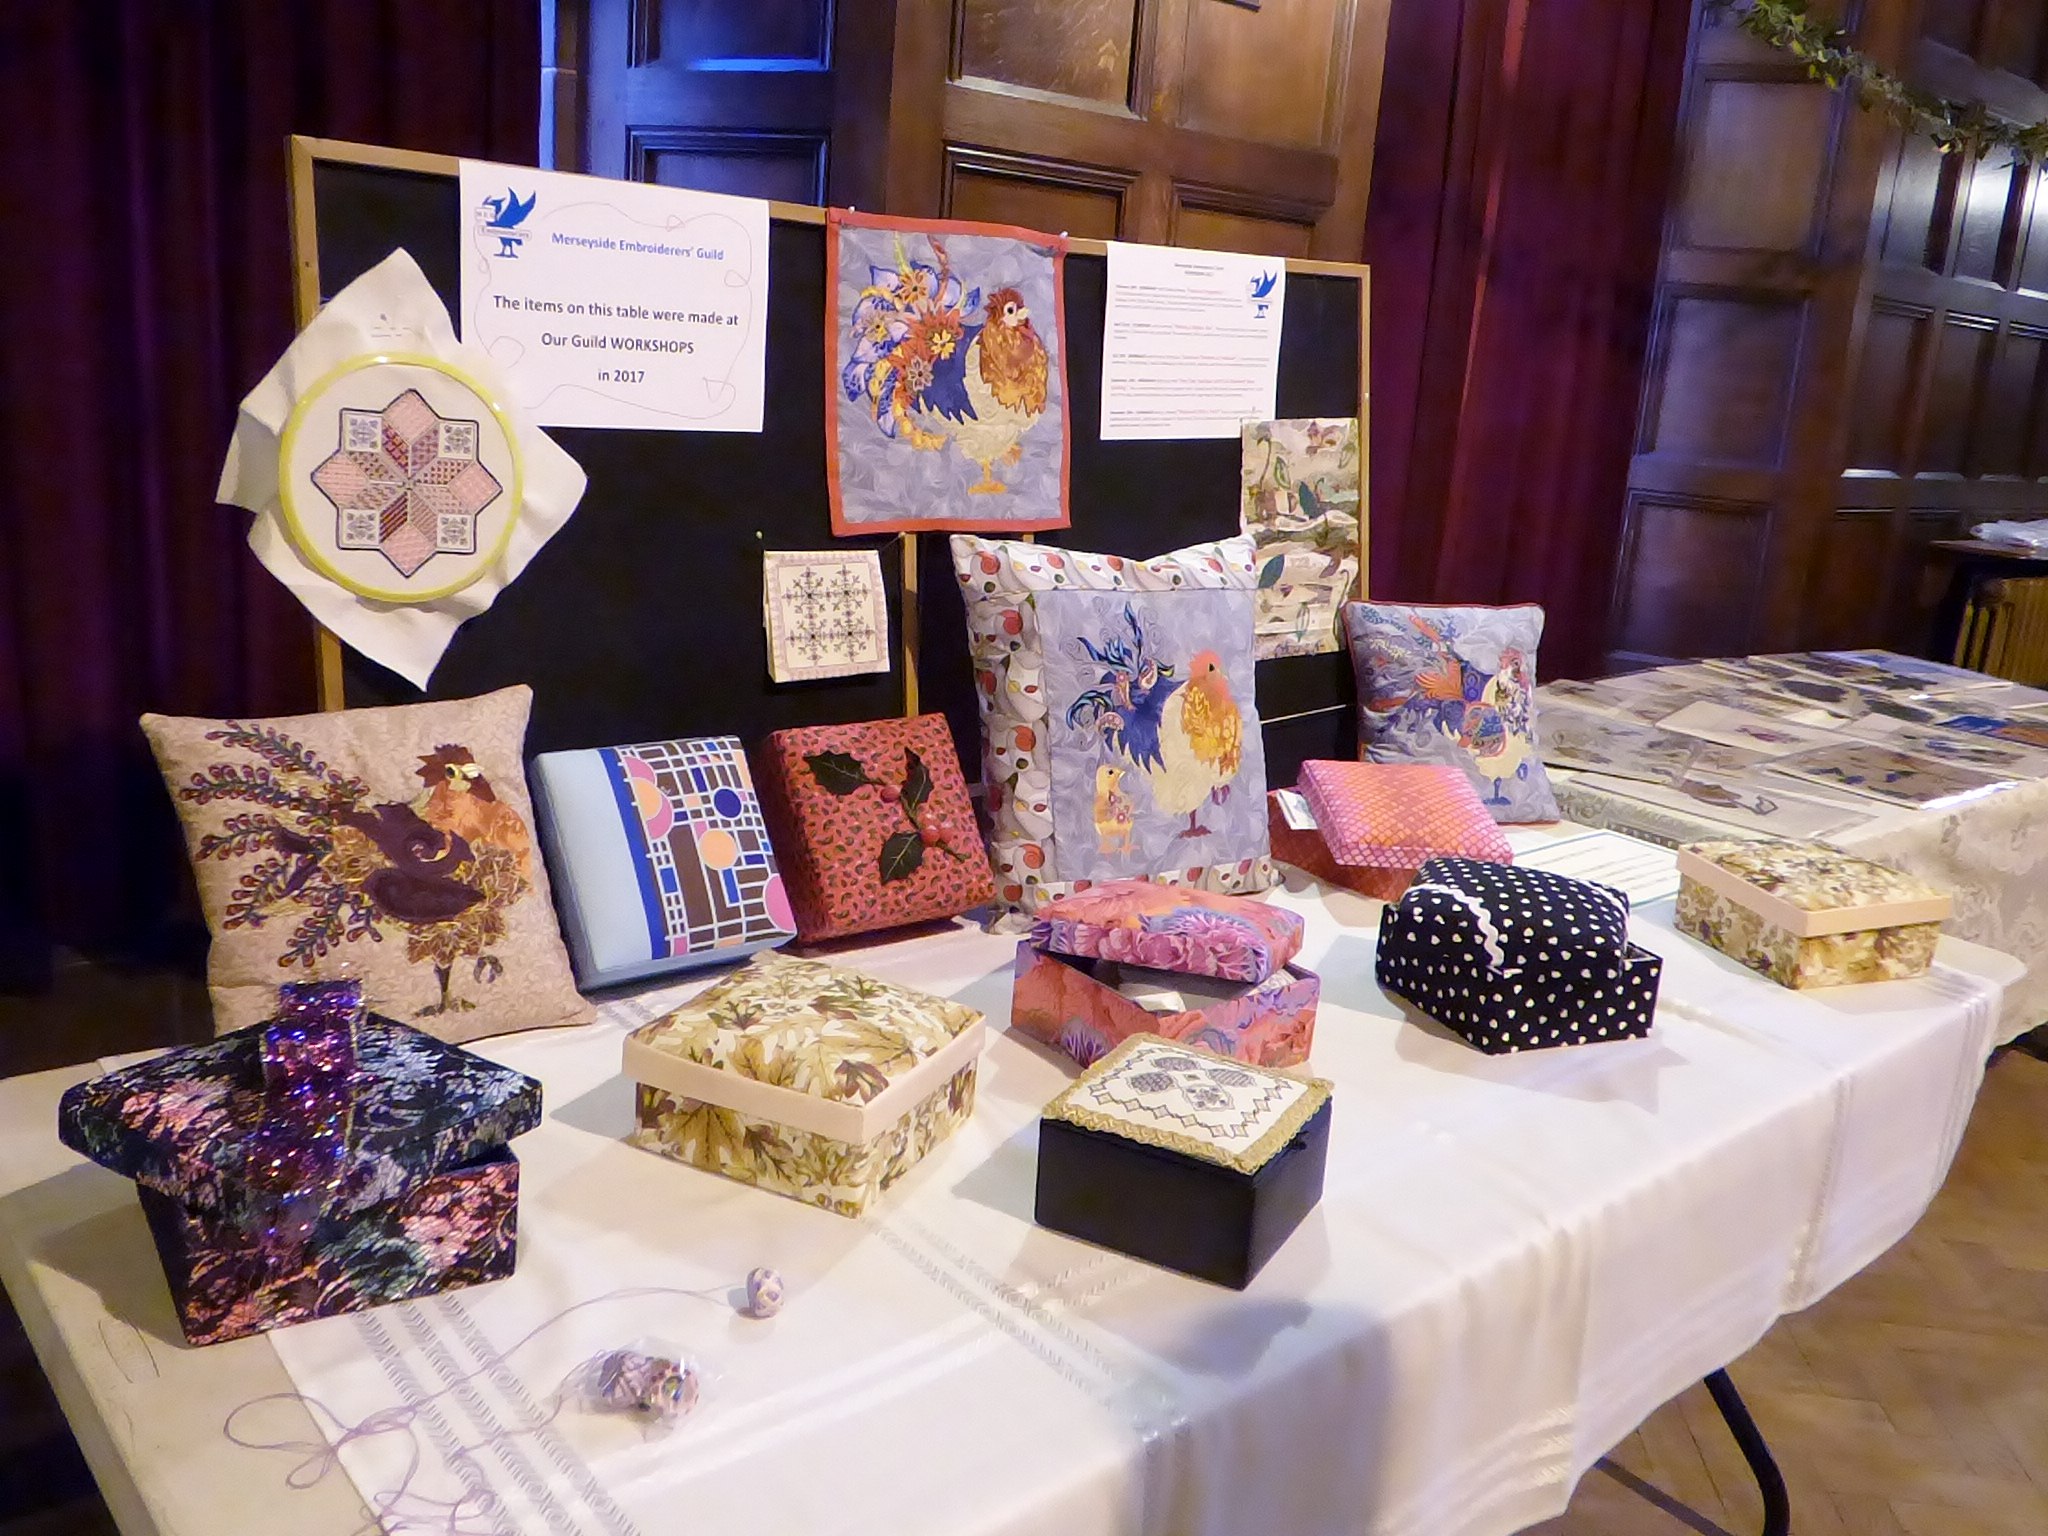 a selection of work produced at MEG workshops during 2017 at MEG Christmas party 2017